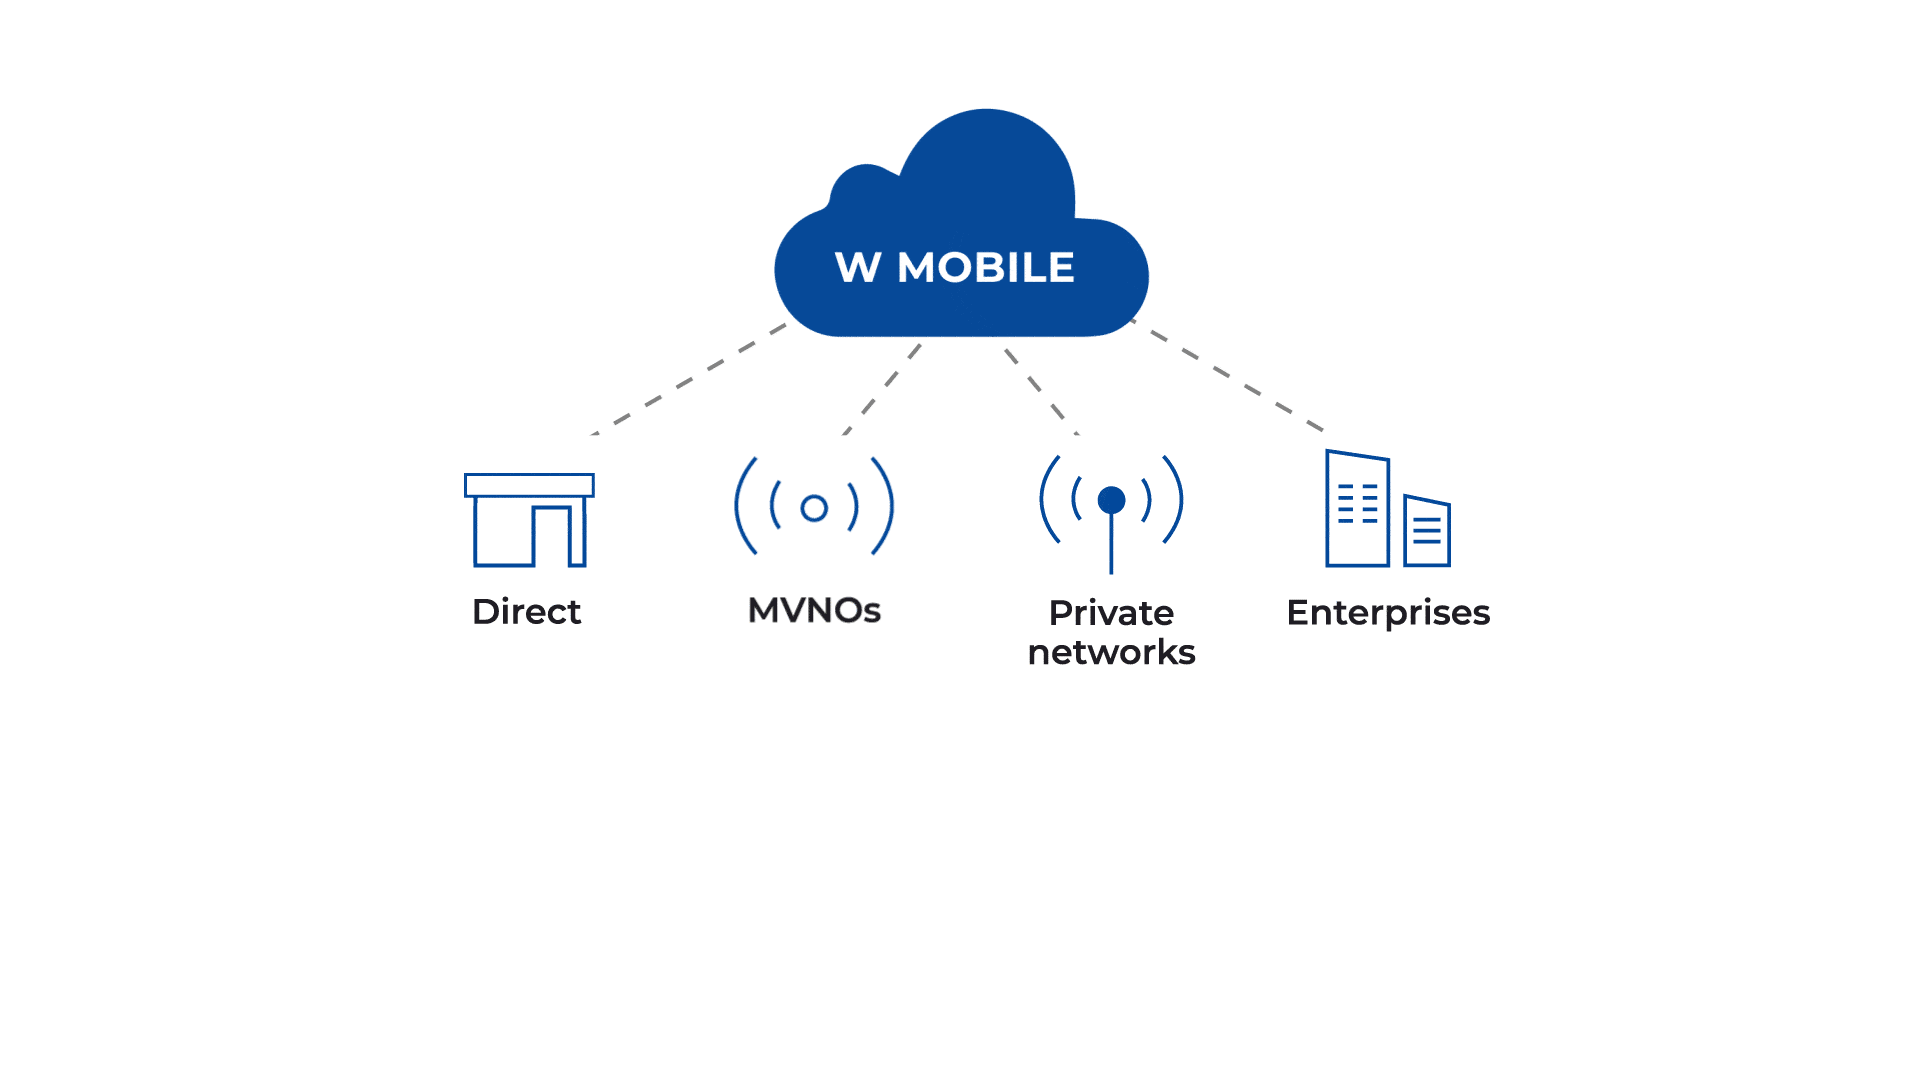 eSIM channel management with Workz cloud eSIM lets telcos easily grow their sales channels